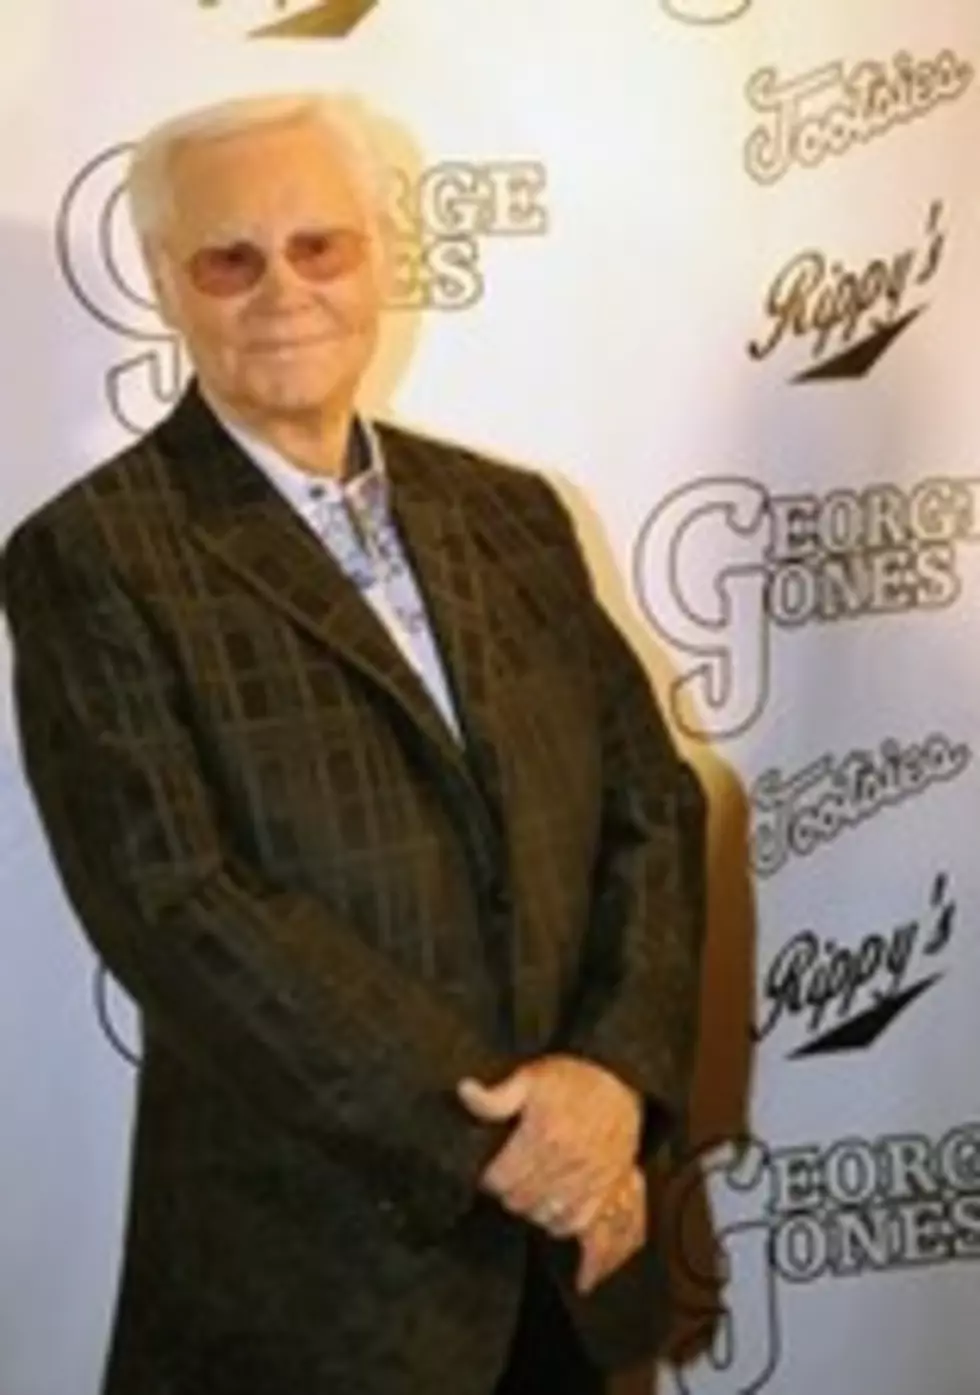 George Jones Home After Hospital Stay